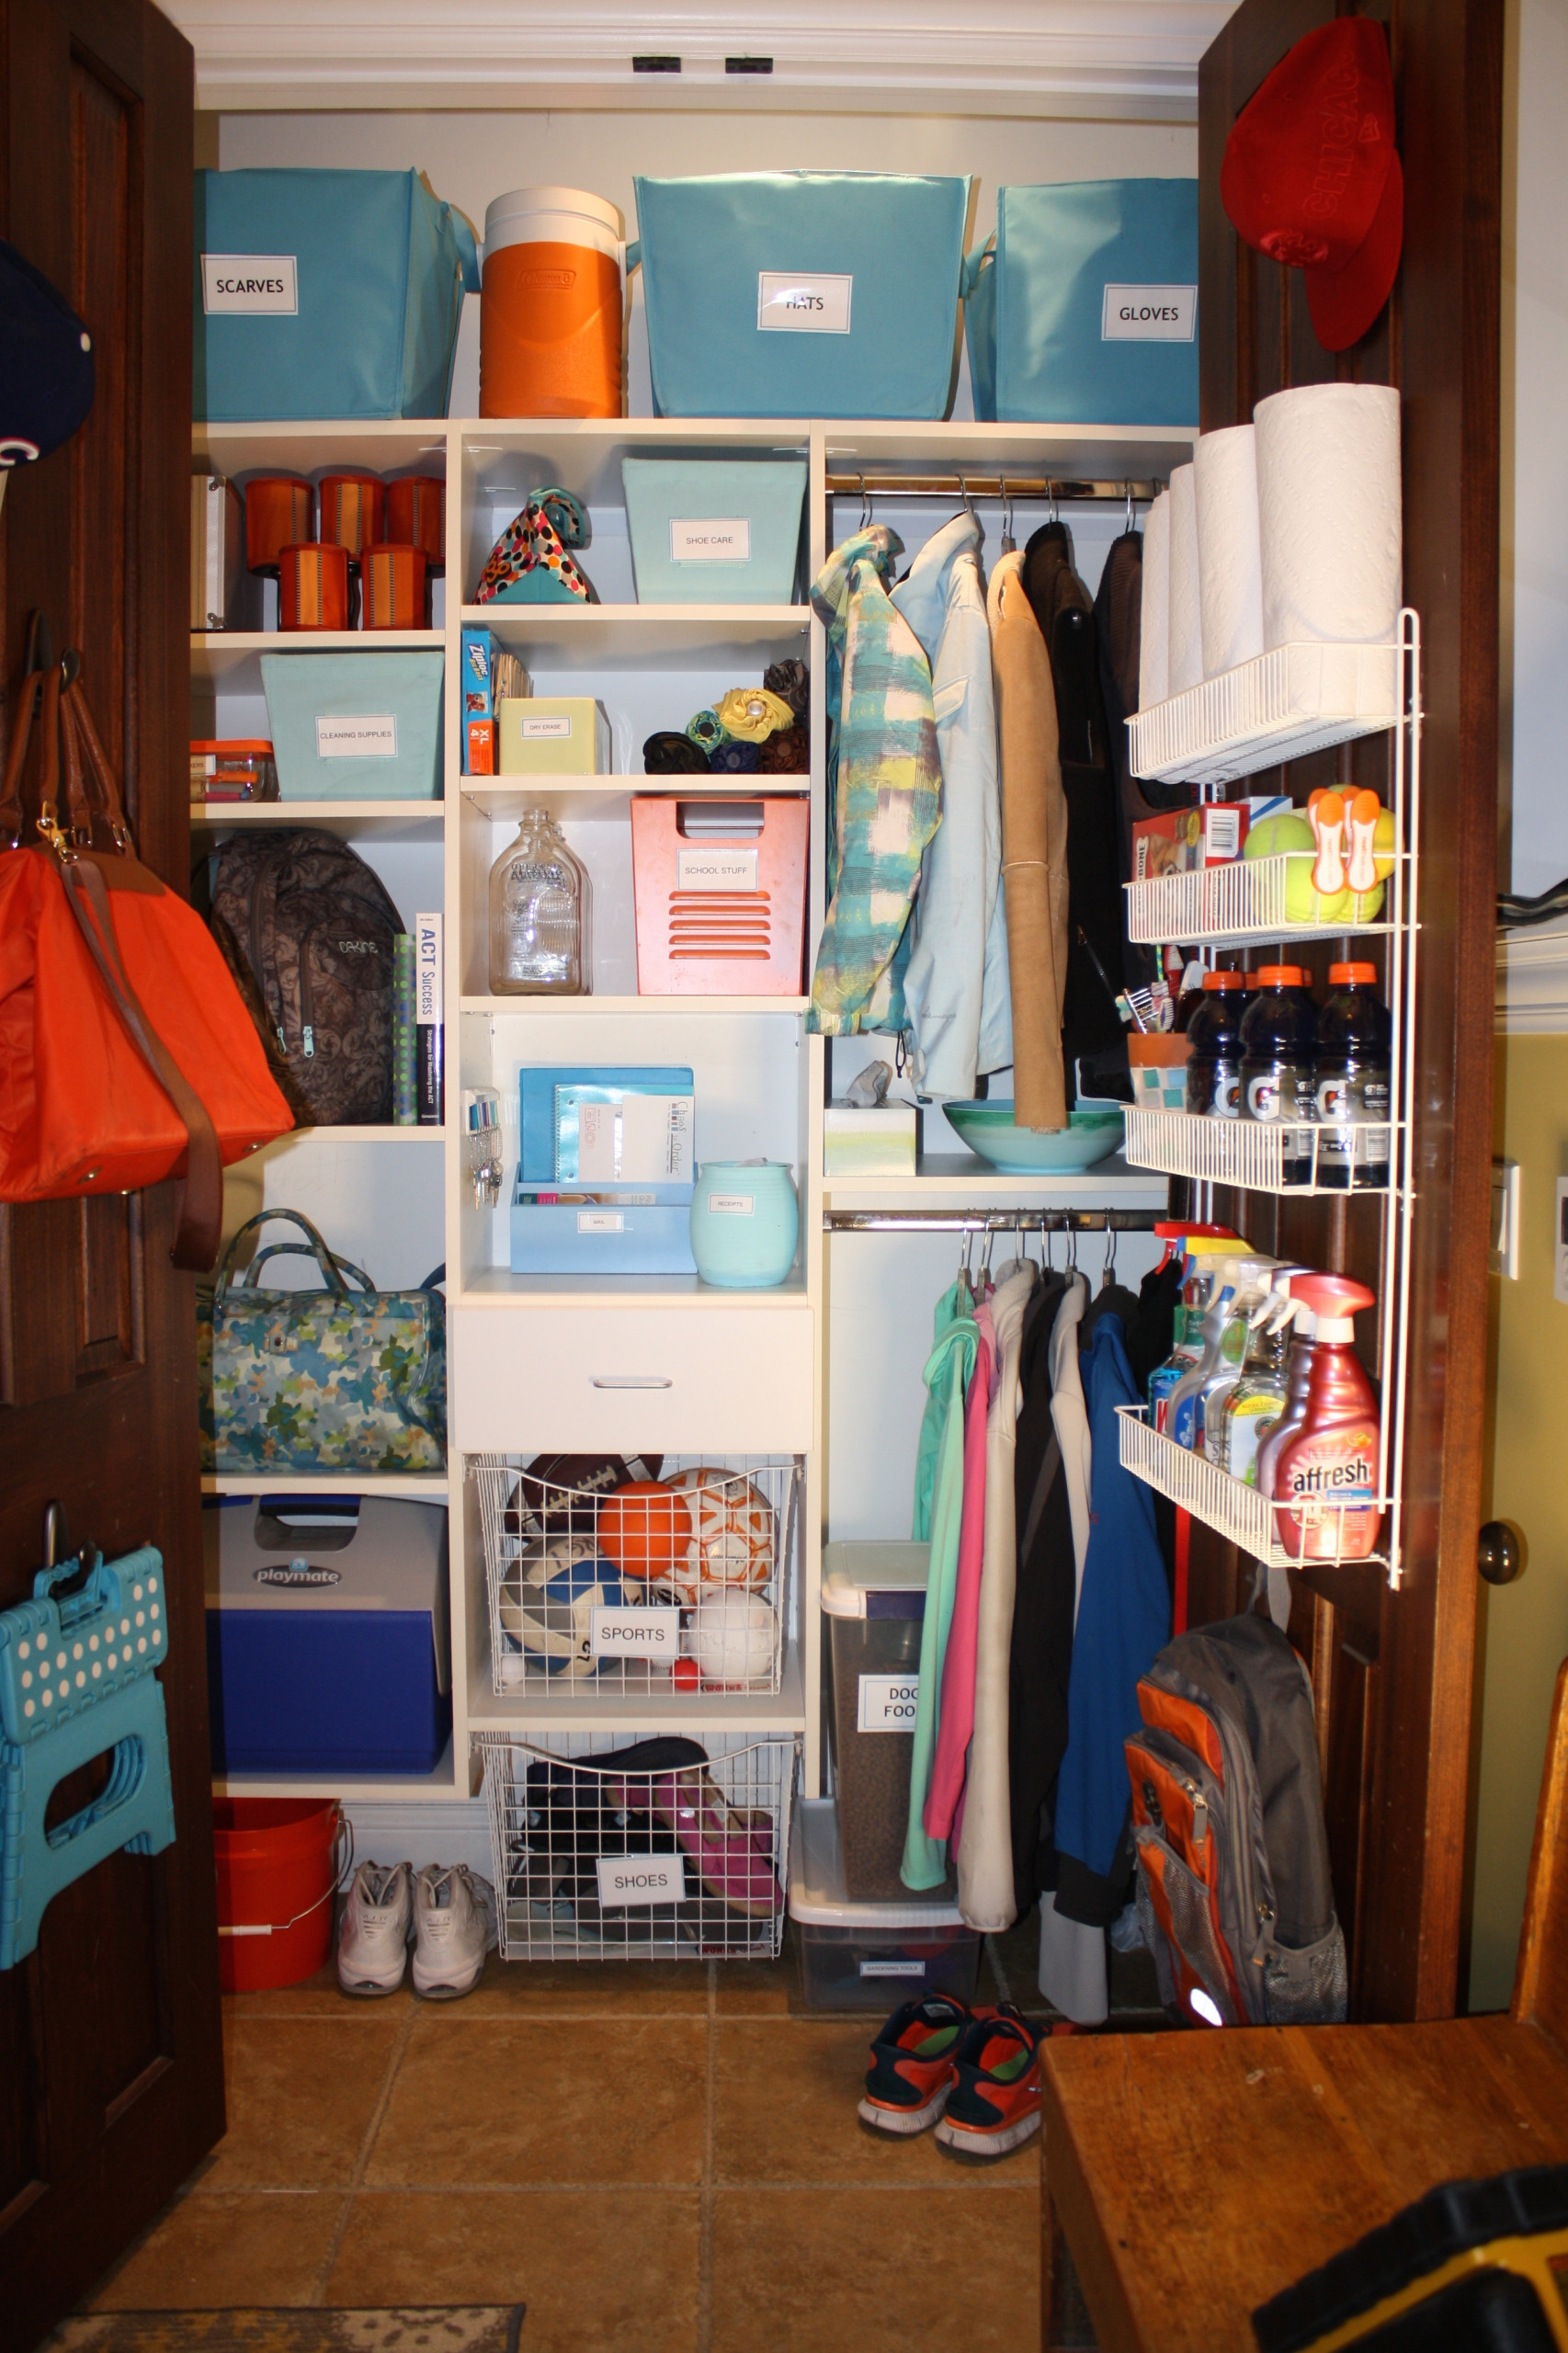 https://st.hzcdn.com/simgs/pictures/entryways/entryway-closet-organizing-project-chaos-to-order-img~c0e1767504fa233e_14-1524-1-114420c.jpg